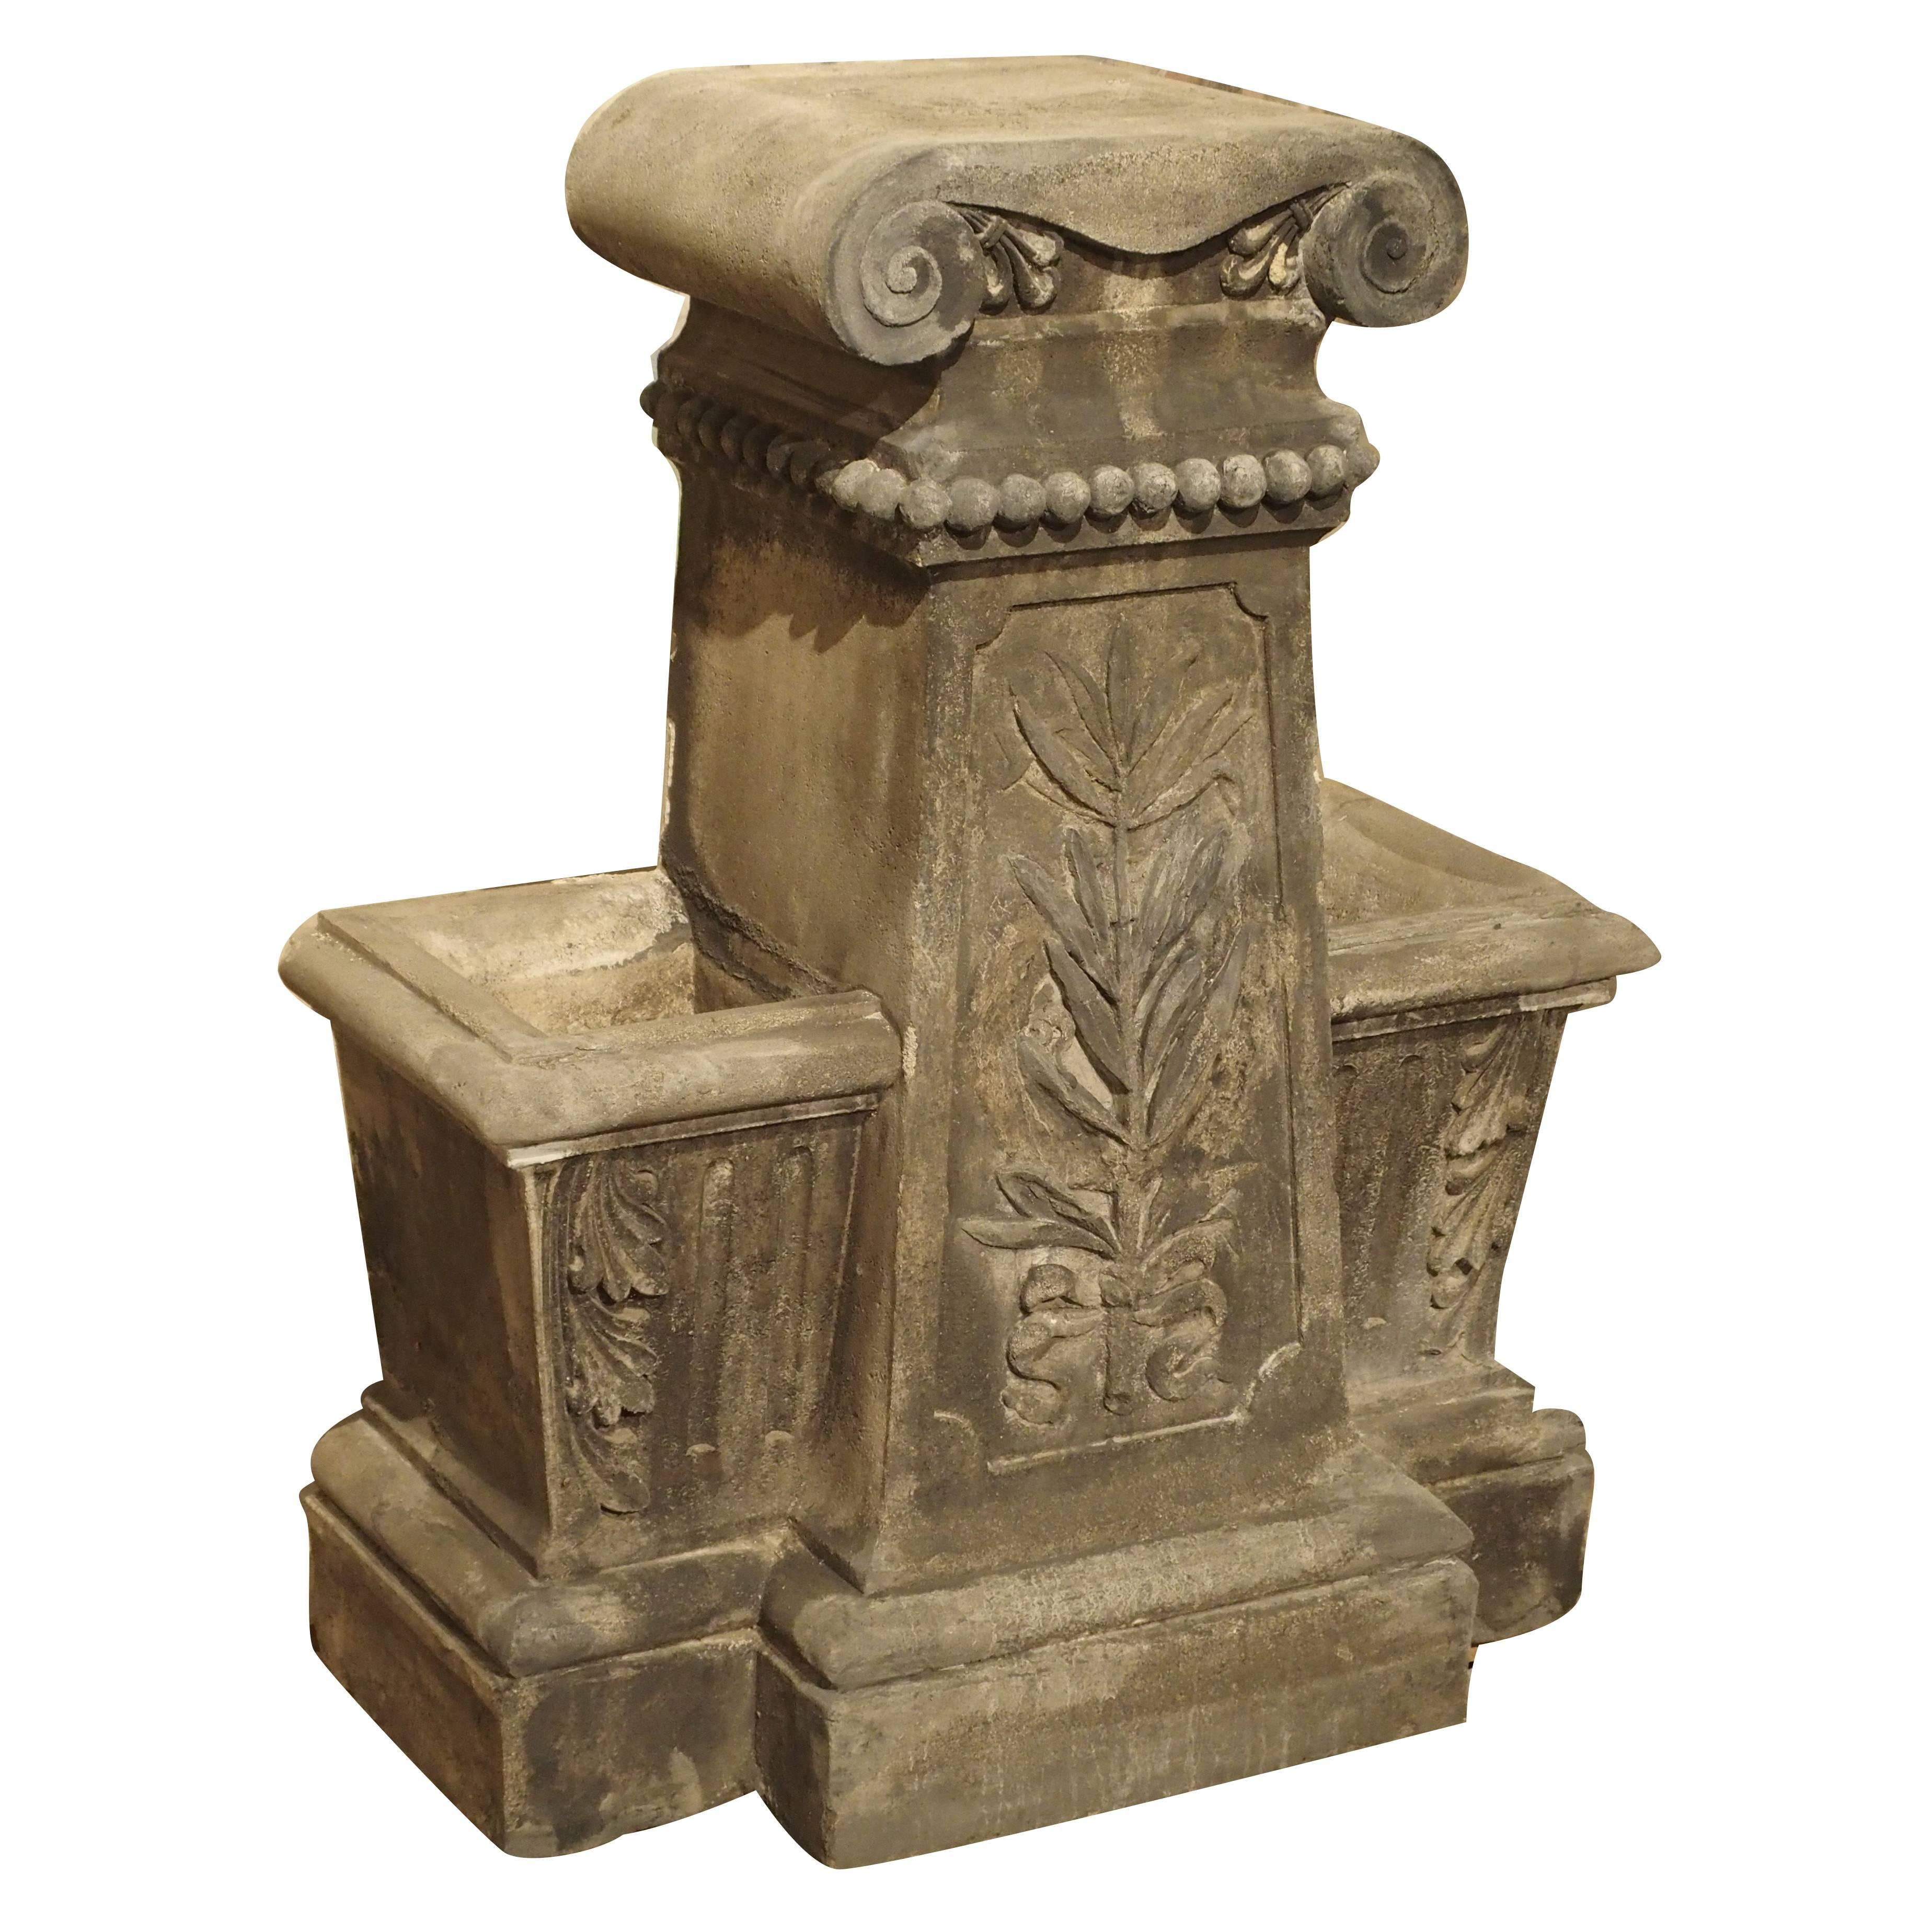 Unusual Reconstituted Stone Jardinière from France, circa 1880